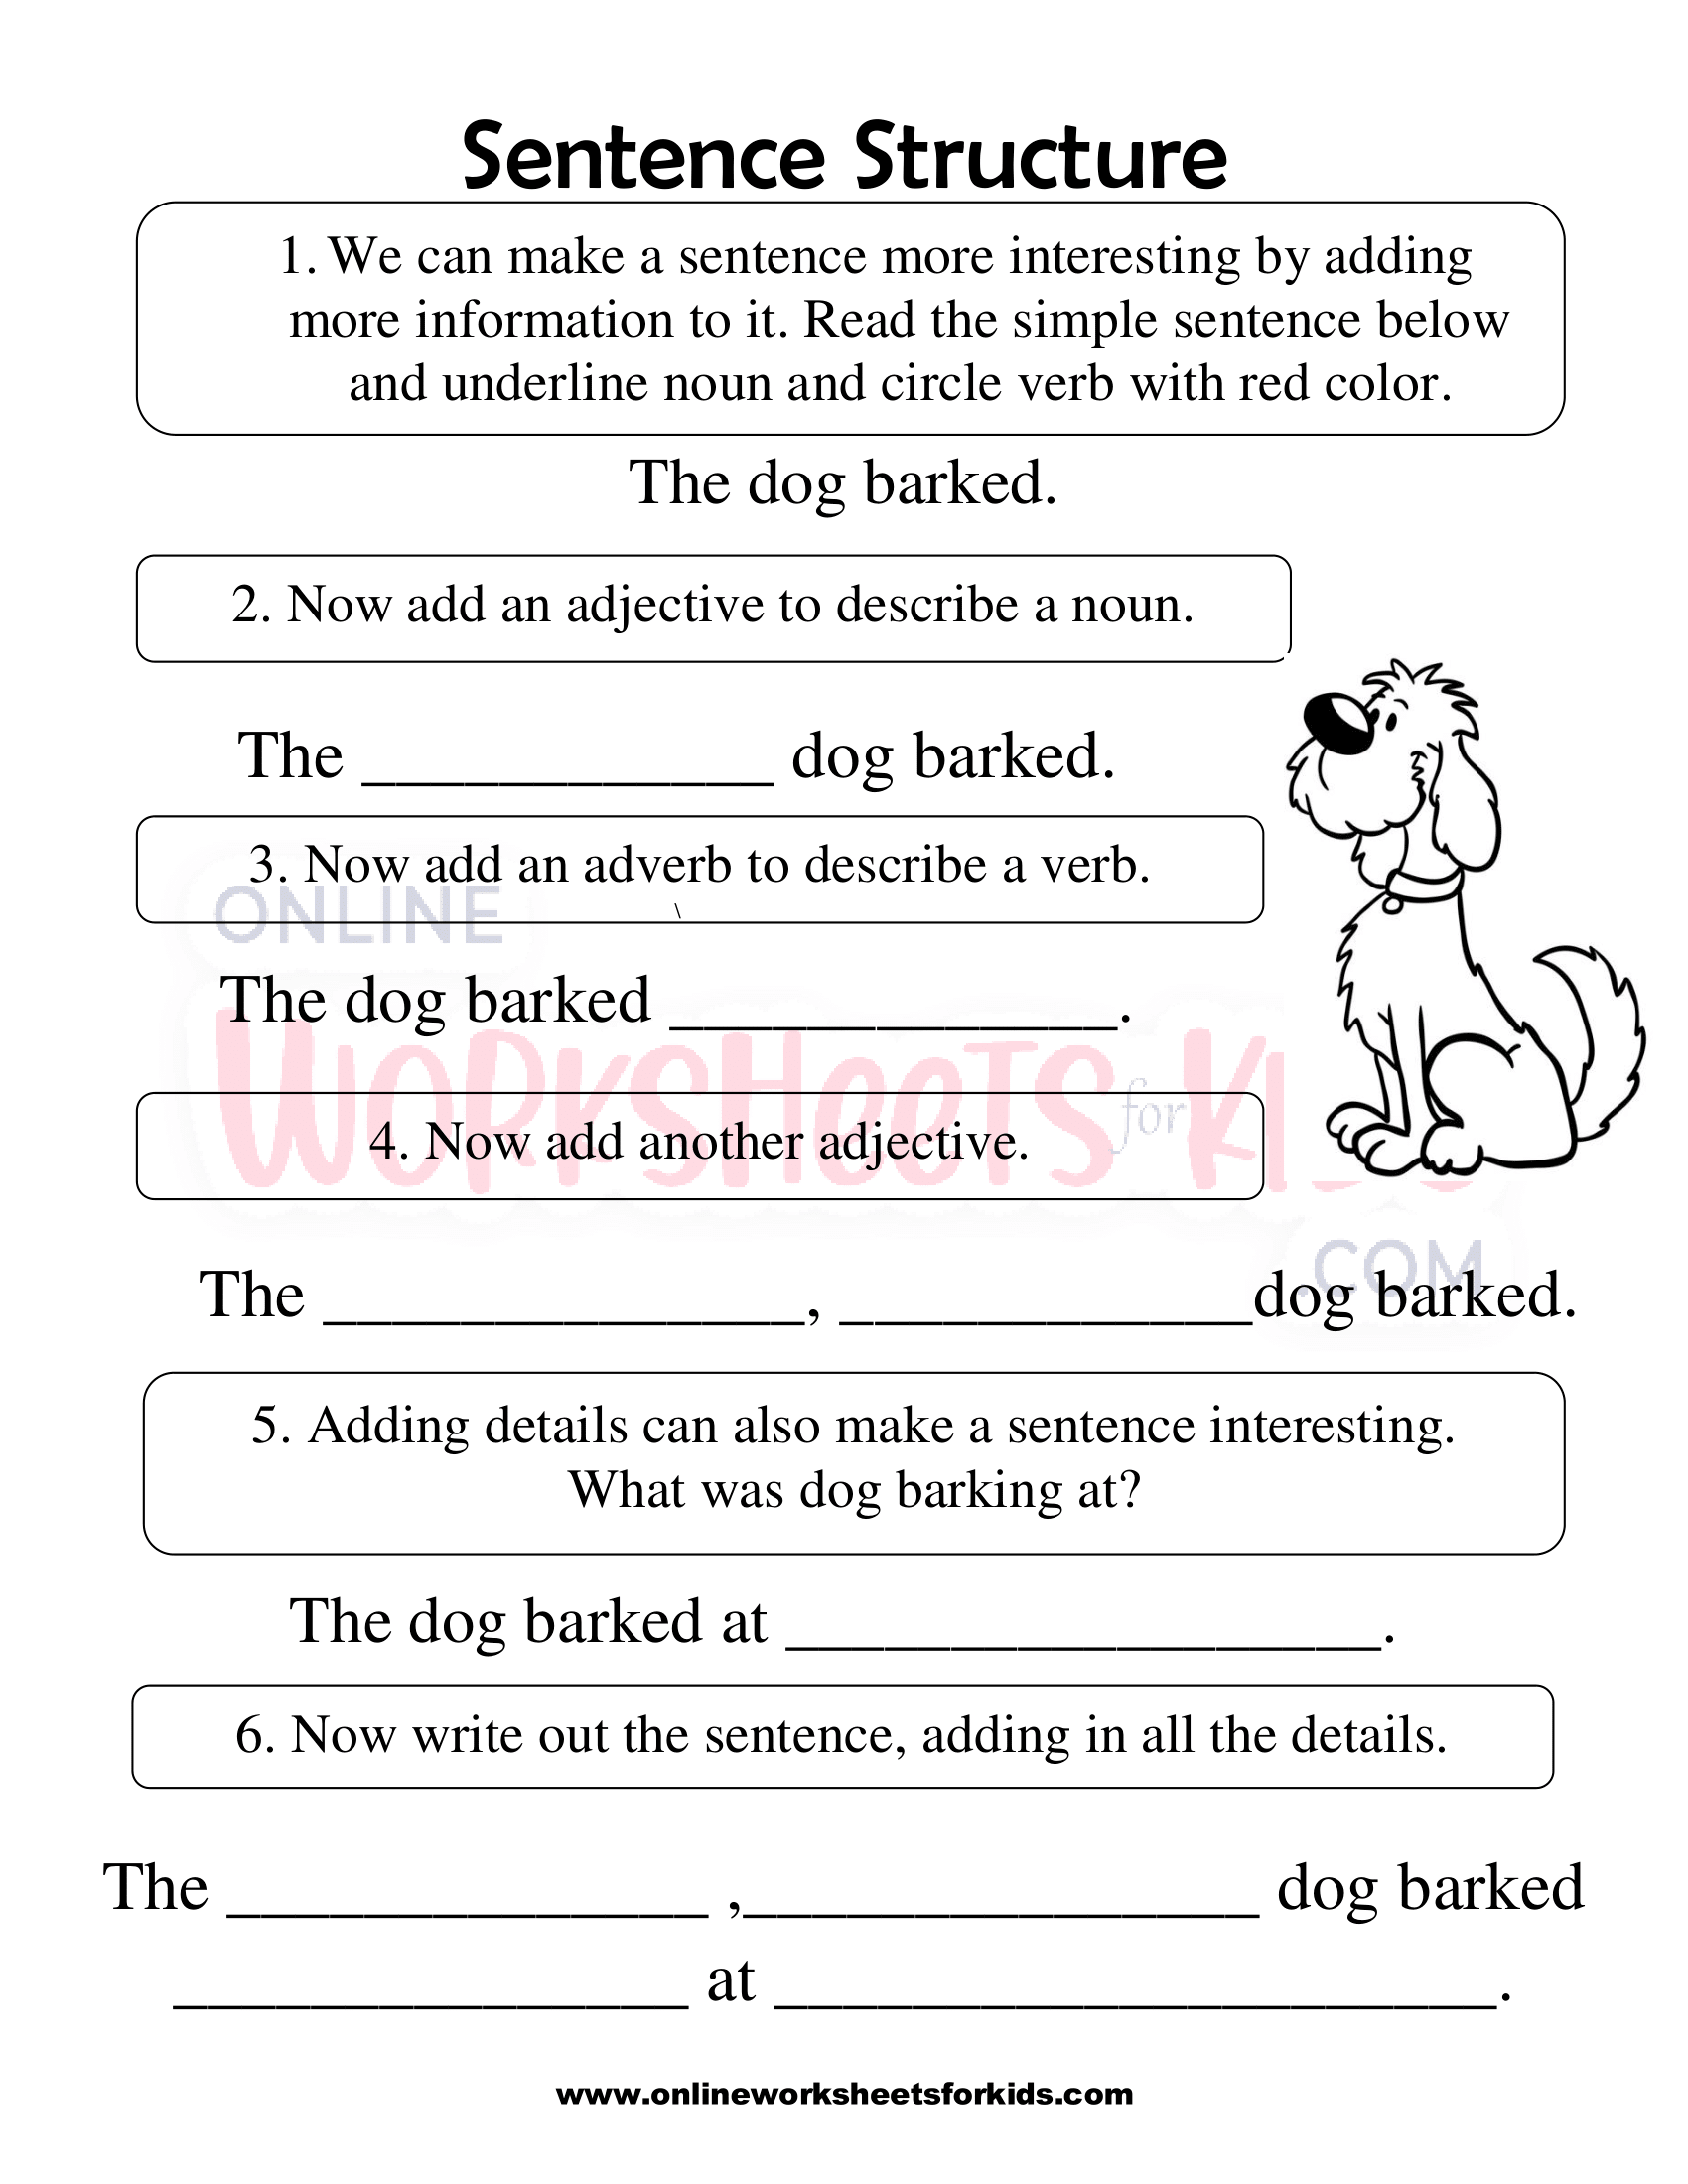 Sentence Structure Worksheets For Third Grade